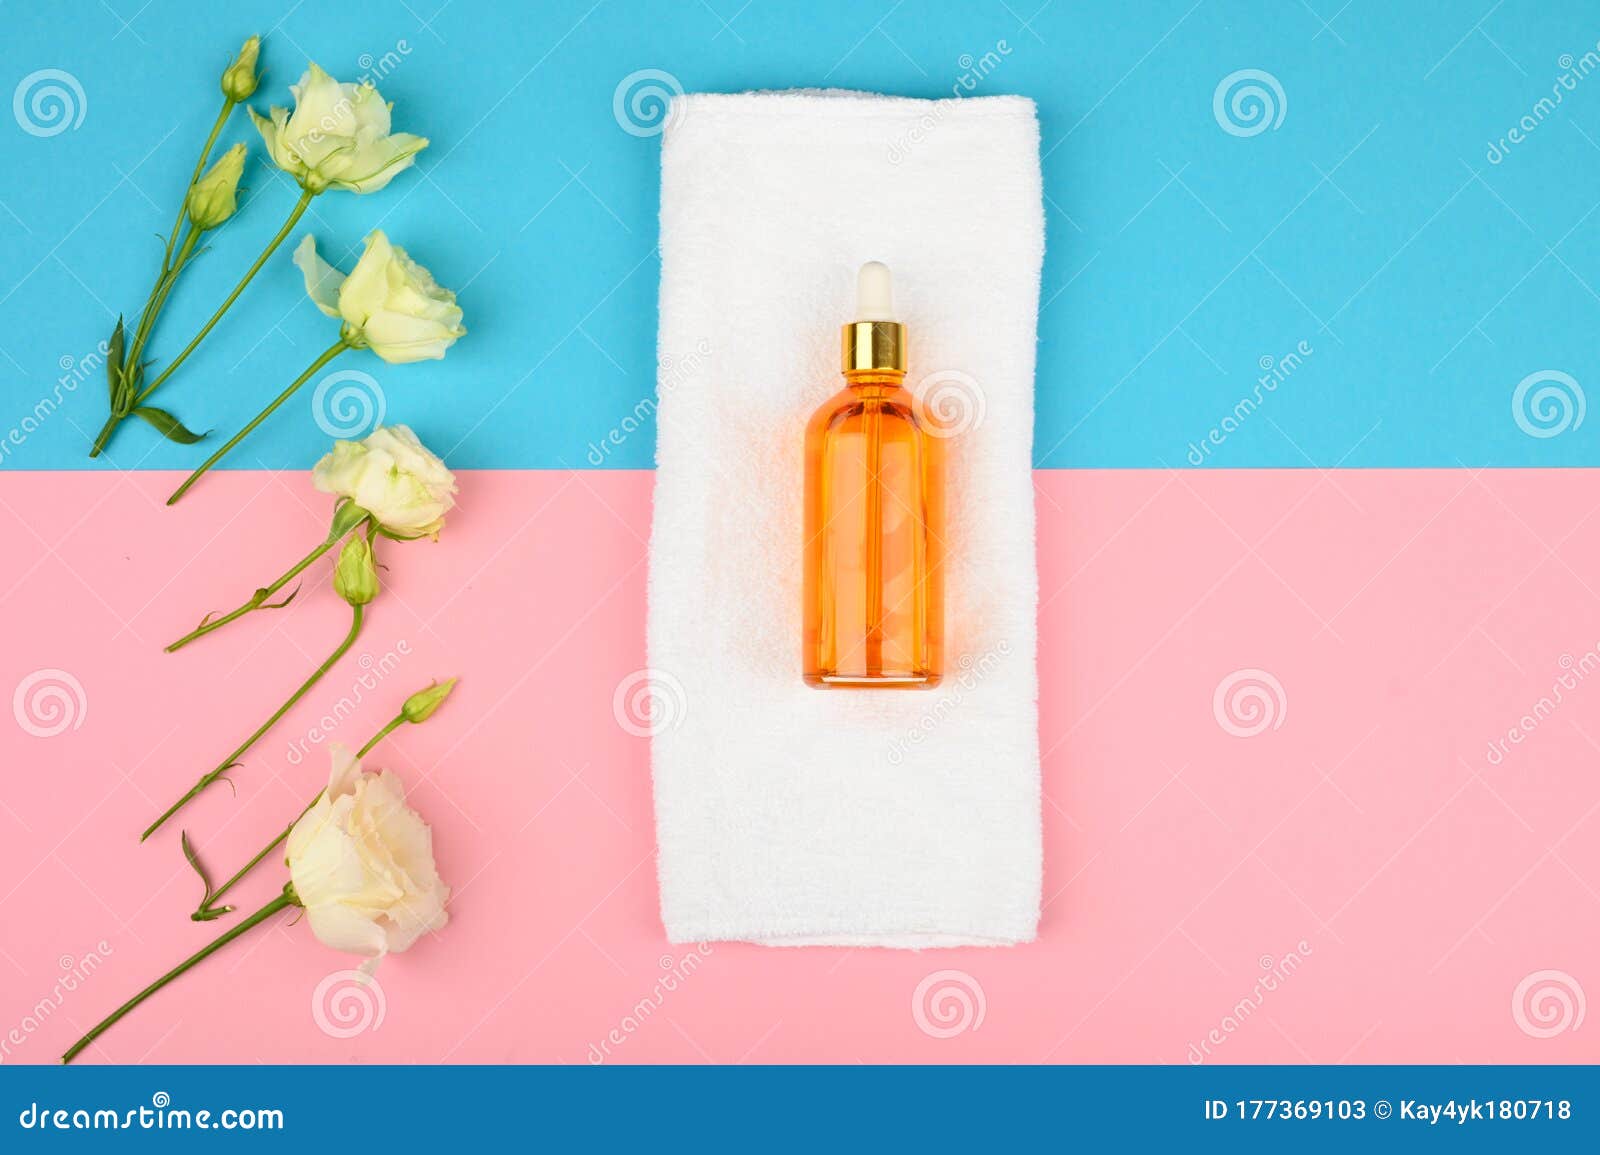 natural spa oils. on a yellow-green background. open and closed buds, place for an inscription. flat lay